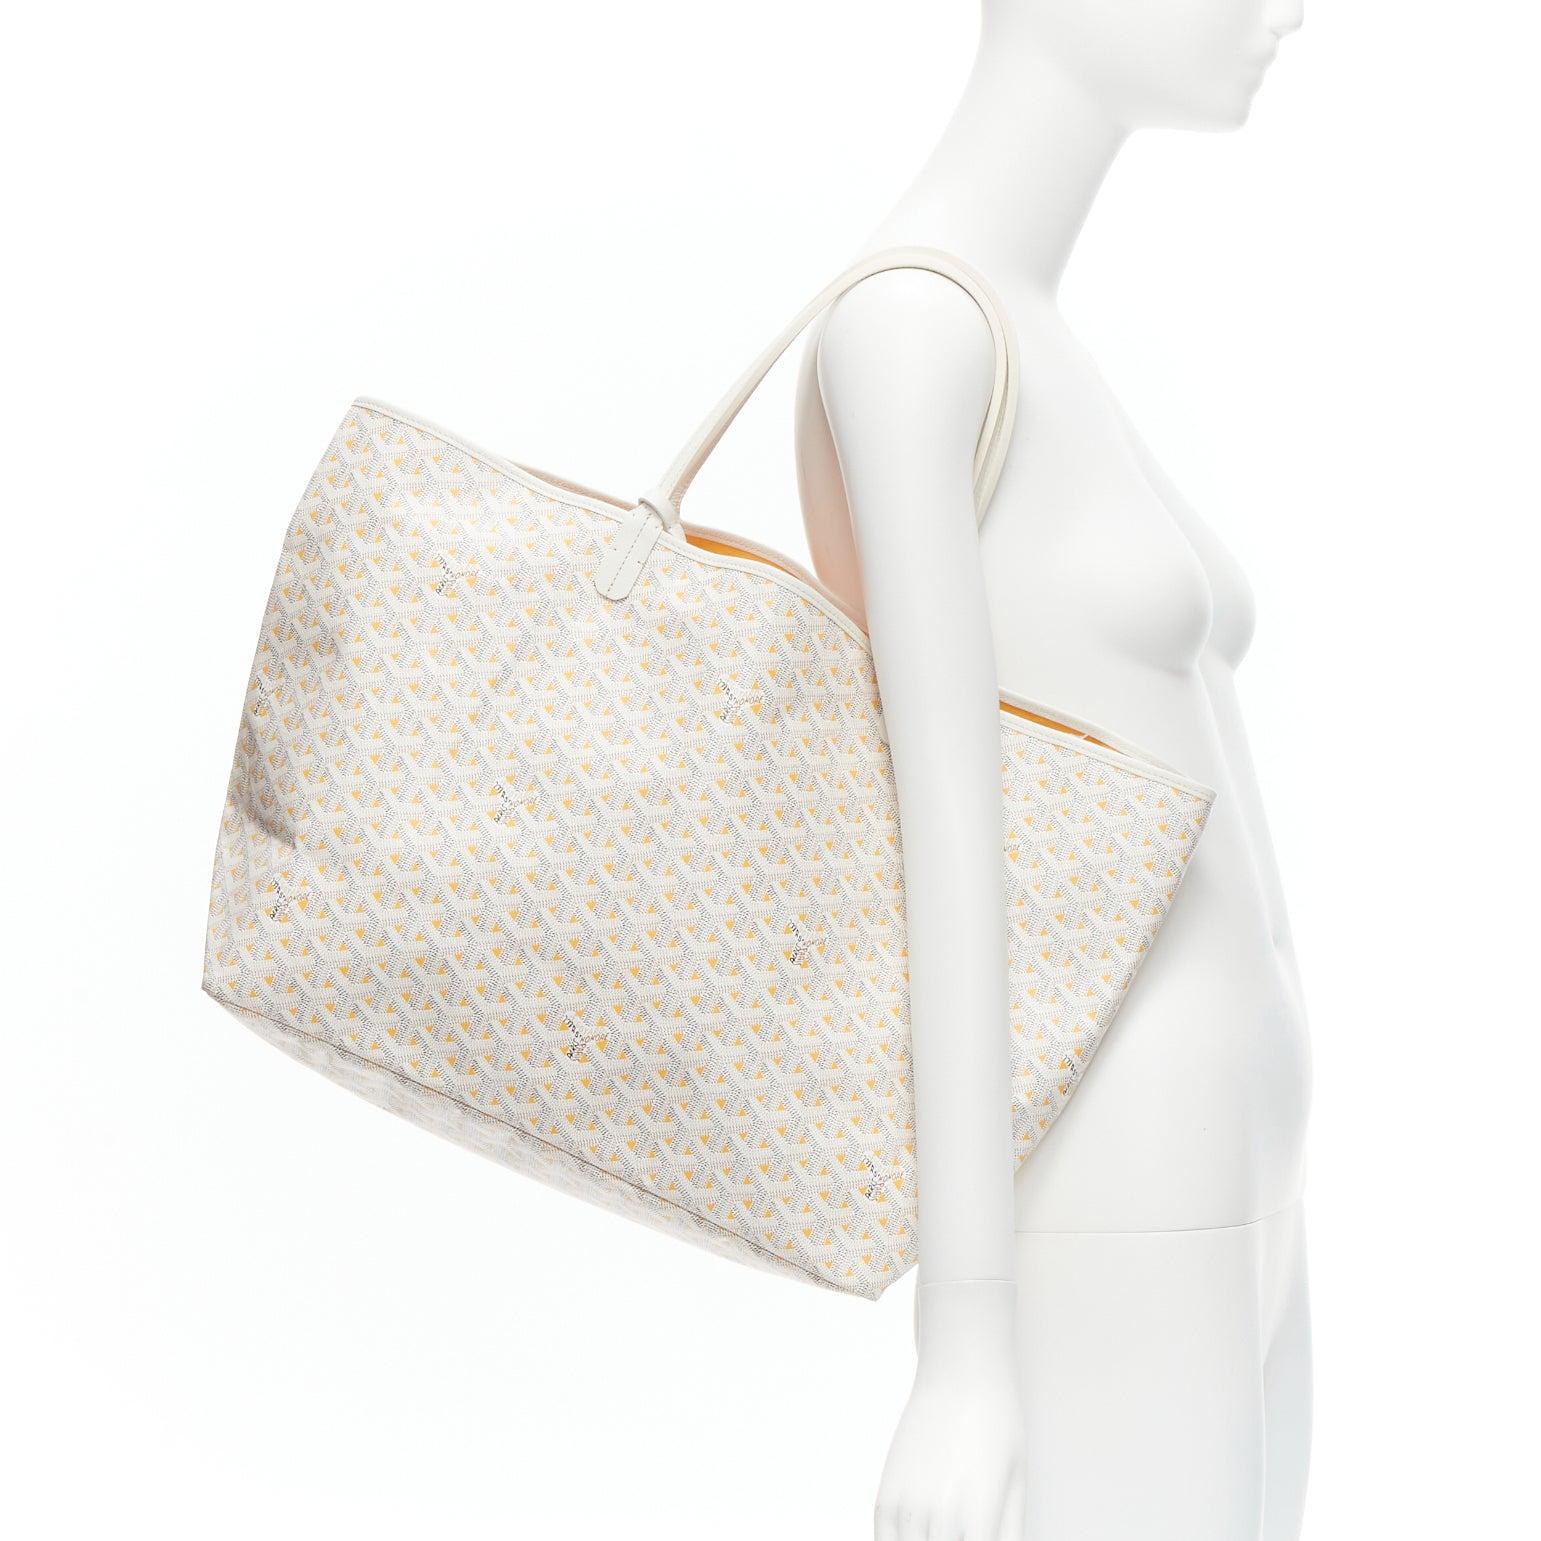 GOYARD Saint Louis GM Limited Reversible white canvas monogram top handle tote bag
Reference: TGAS/D00535
Brand: Goyard
Model: Saint Louis GM
Material: Canvas, Leather
Color: White
Pattern: Monogram
Lining: Yellow Fabric
Extra Details: With small